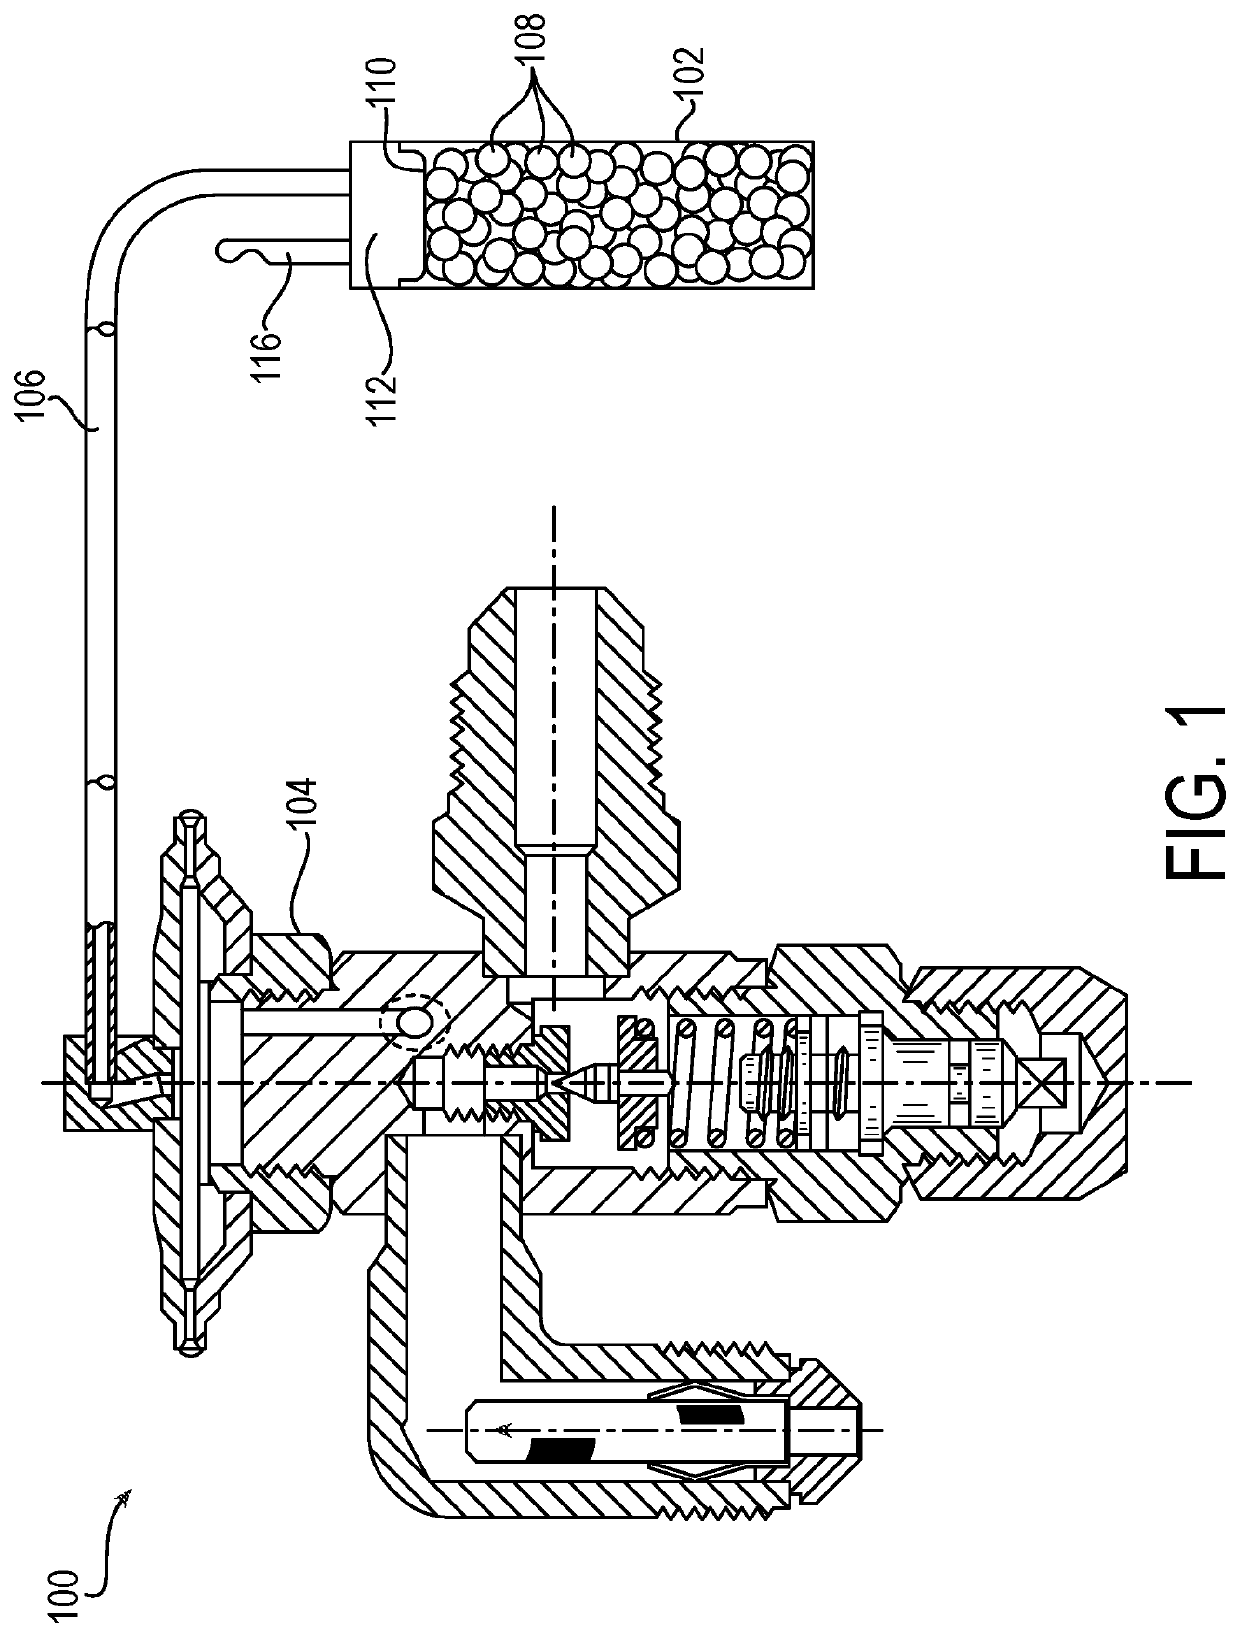 Thermal sensing bulb containing a ballast material for an expansion valve